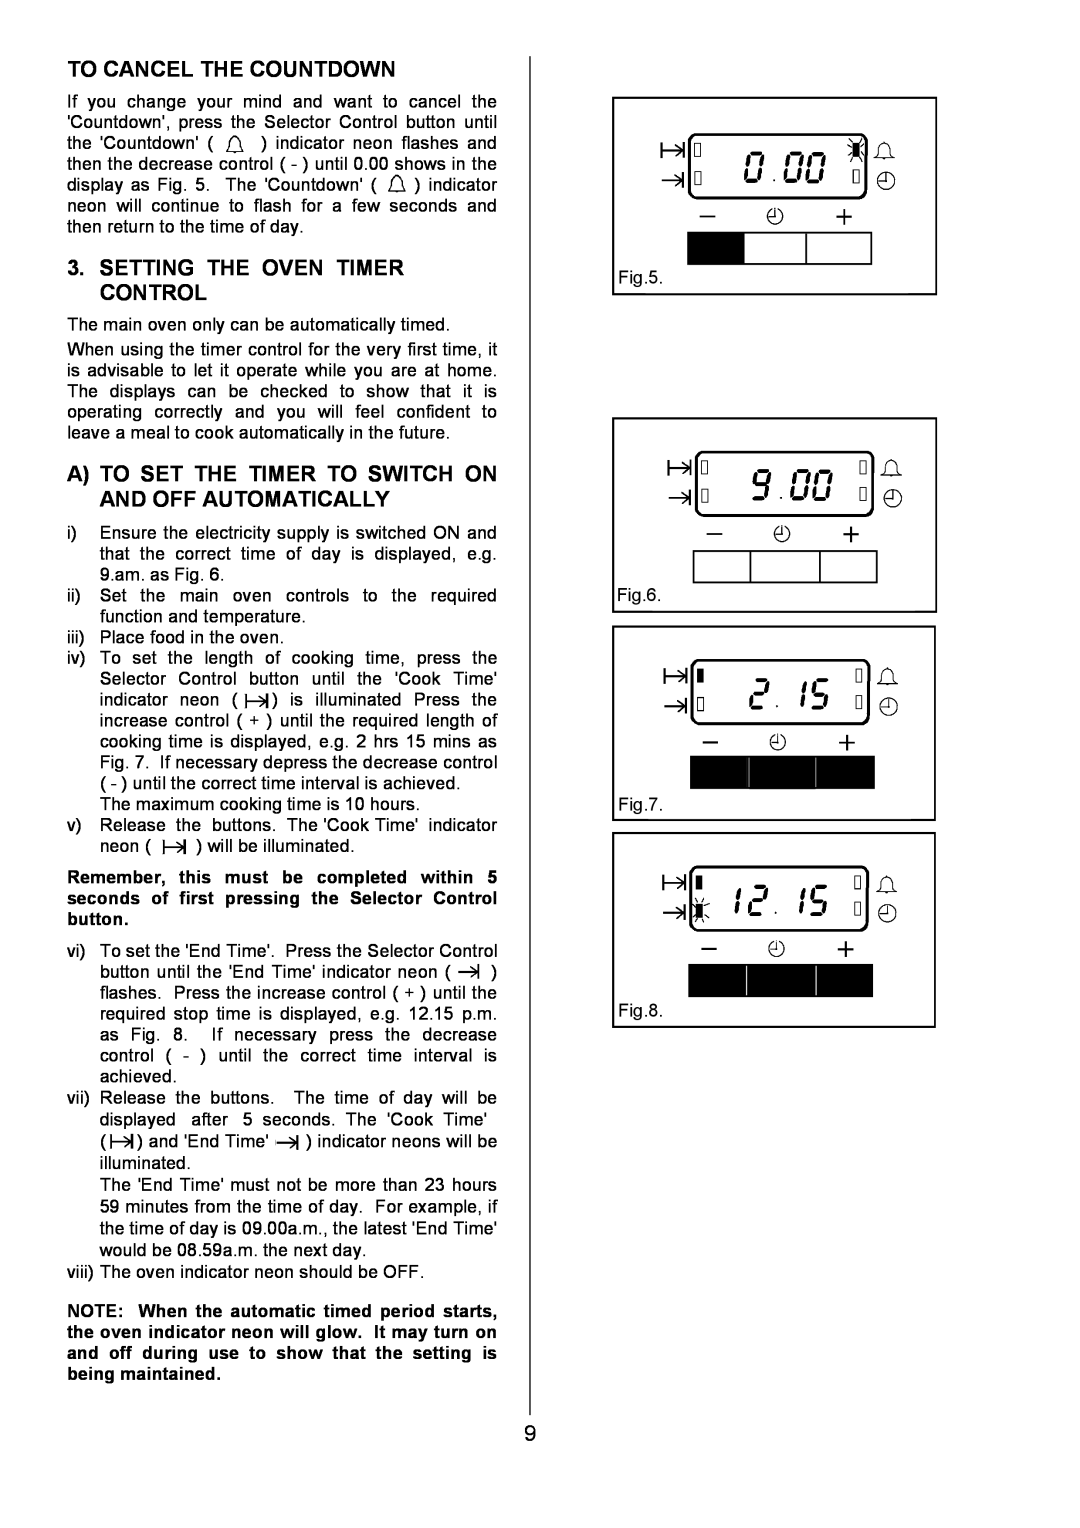 AEG 311704300, U7101-4 manual To Cancel The Countdown, Setting The Oven Timer Control 